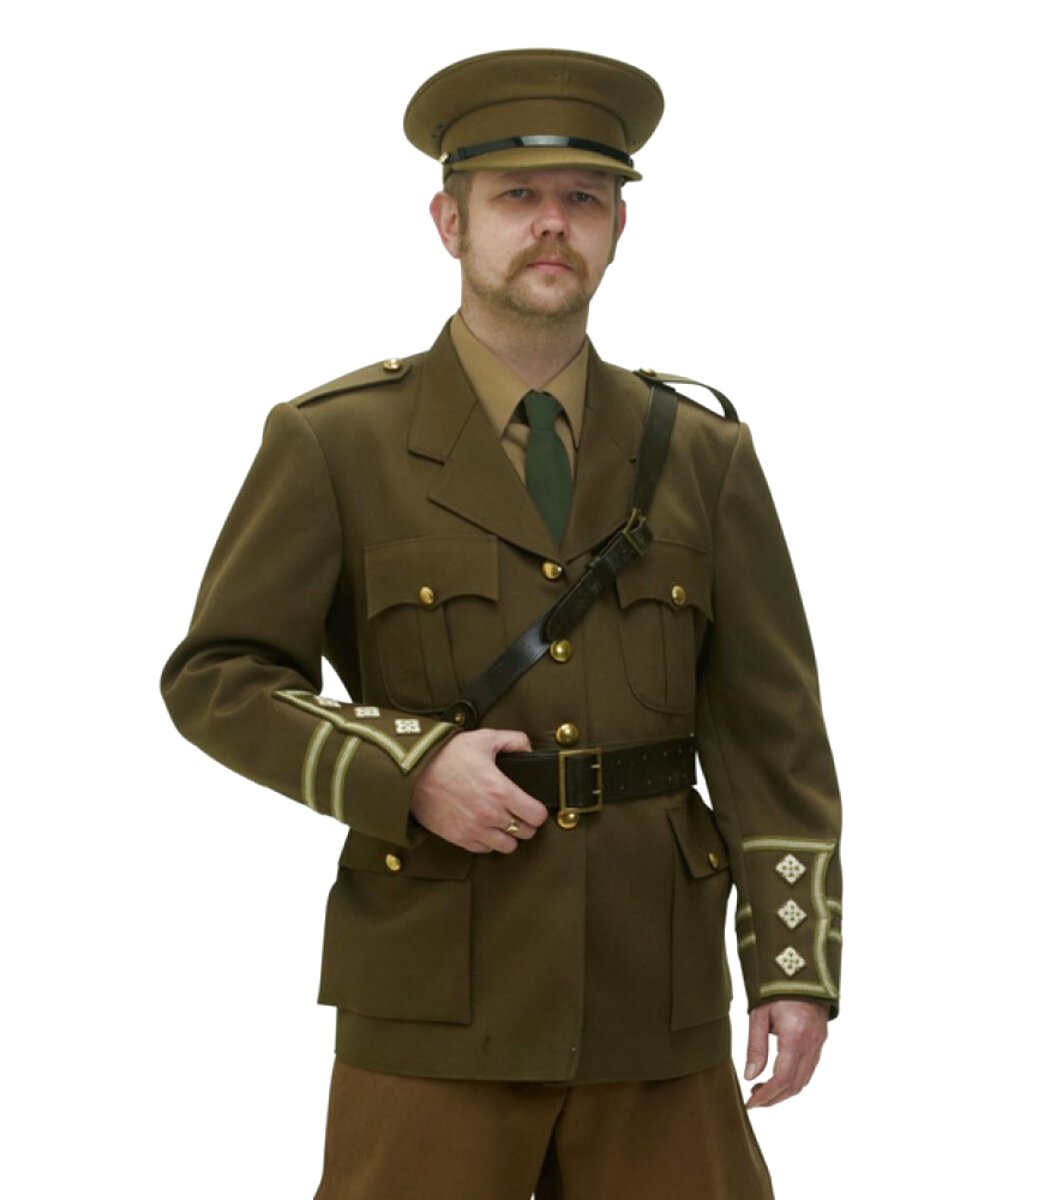 Ww1 Officers Uniform for sale in UK | 60 used Ww1 Officers Uniforms